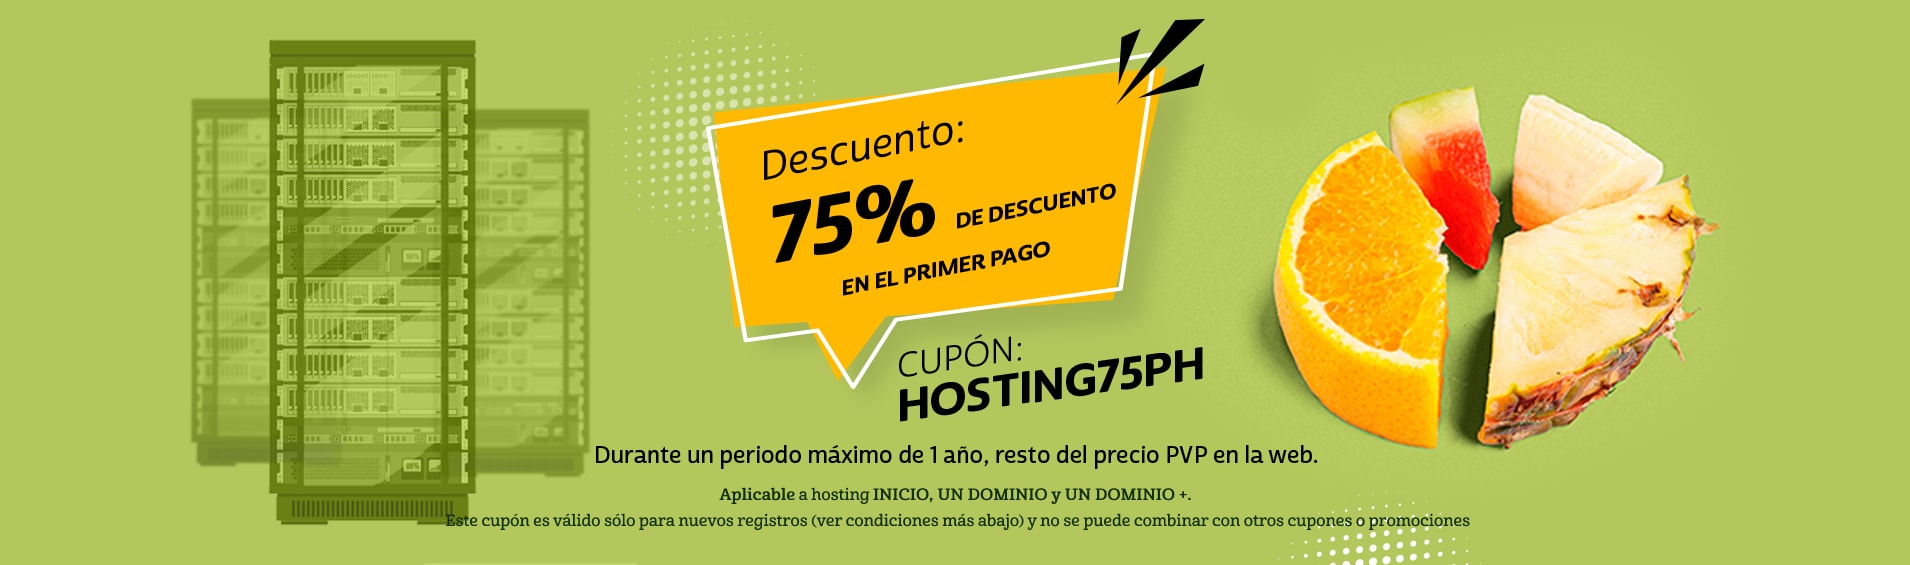 cupon profesional hosting descuento 75%